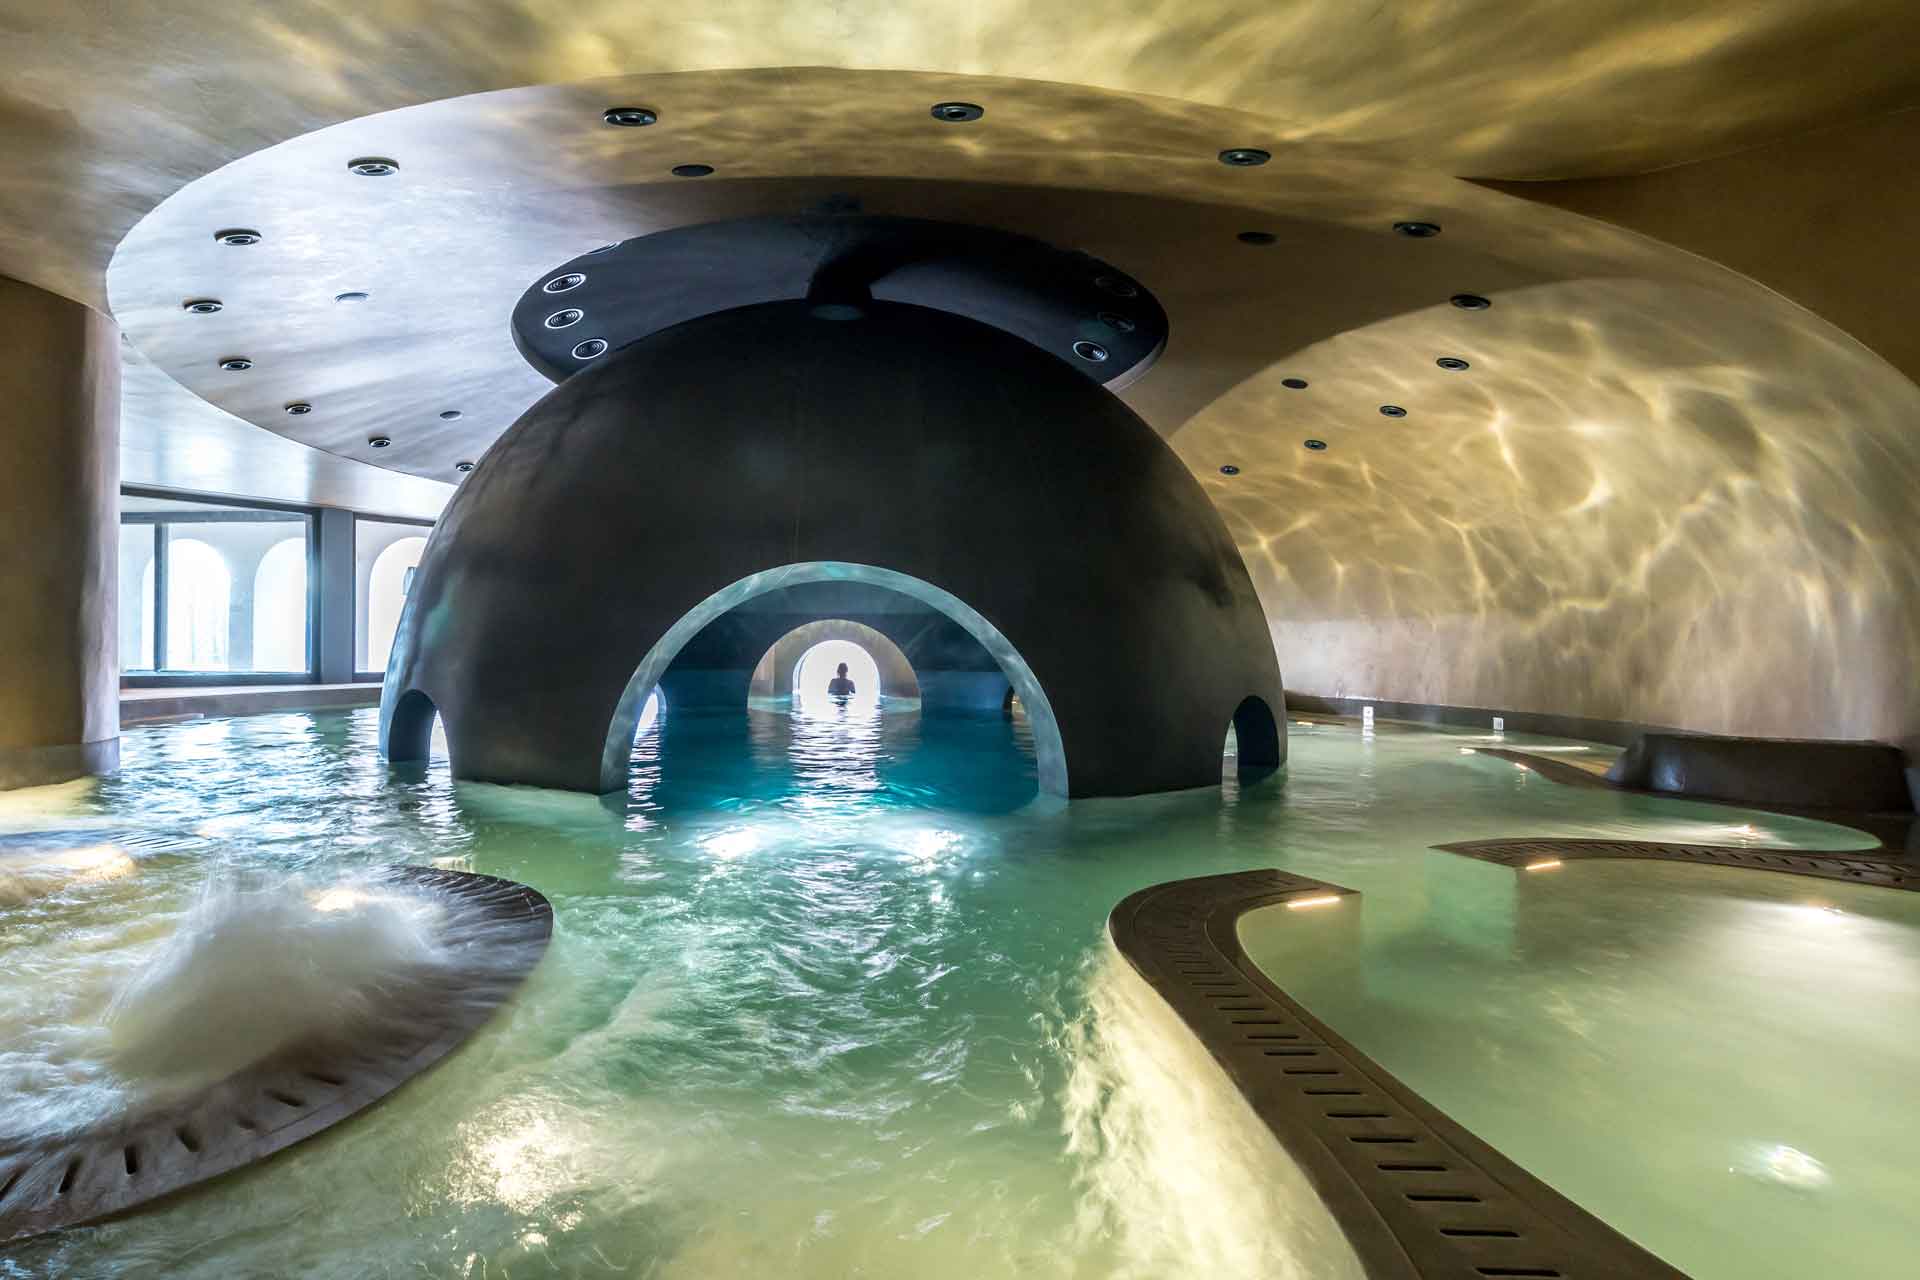 Underground pool at Euphoria Retreat, with domed stone ceilings.